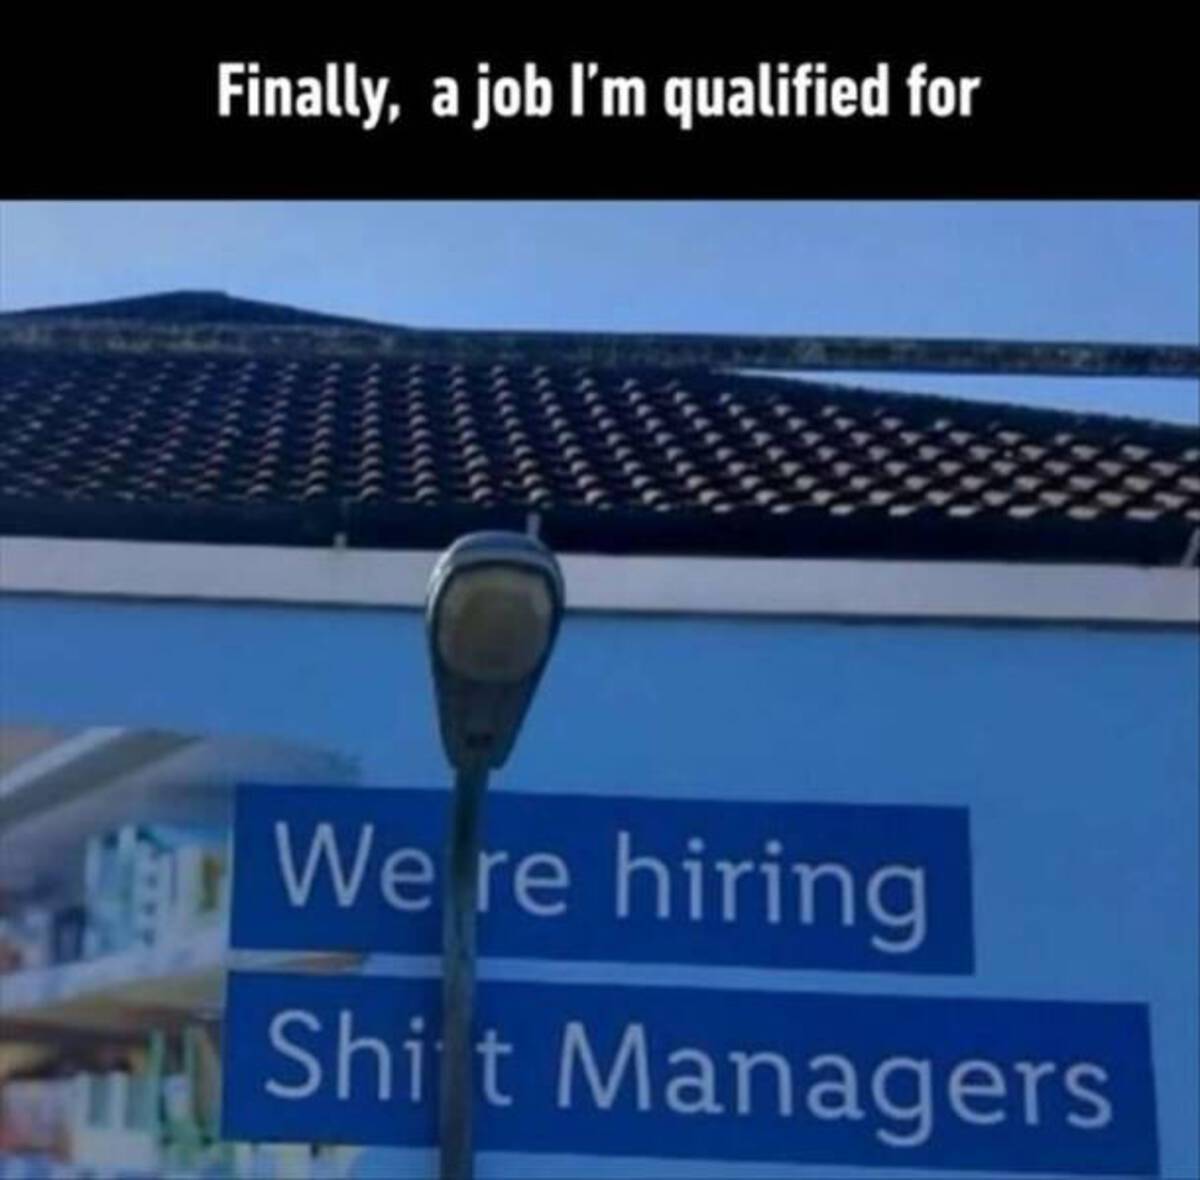 roof - Finally, a job I'm qualified for We re hiring Shift Managers